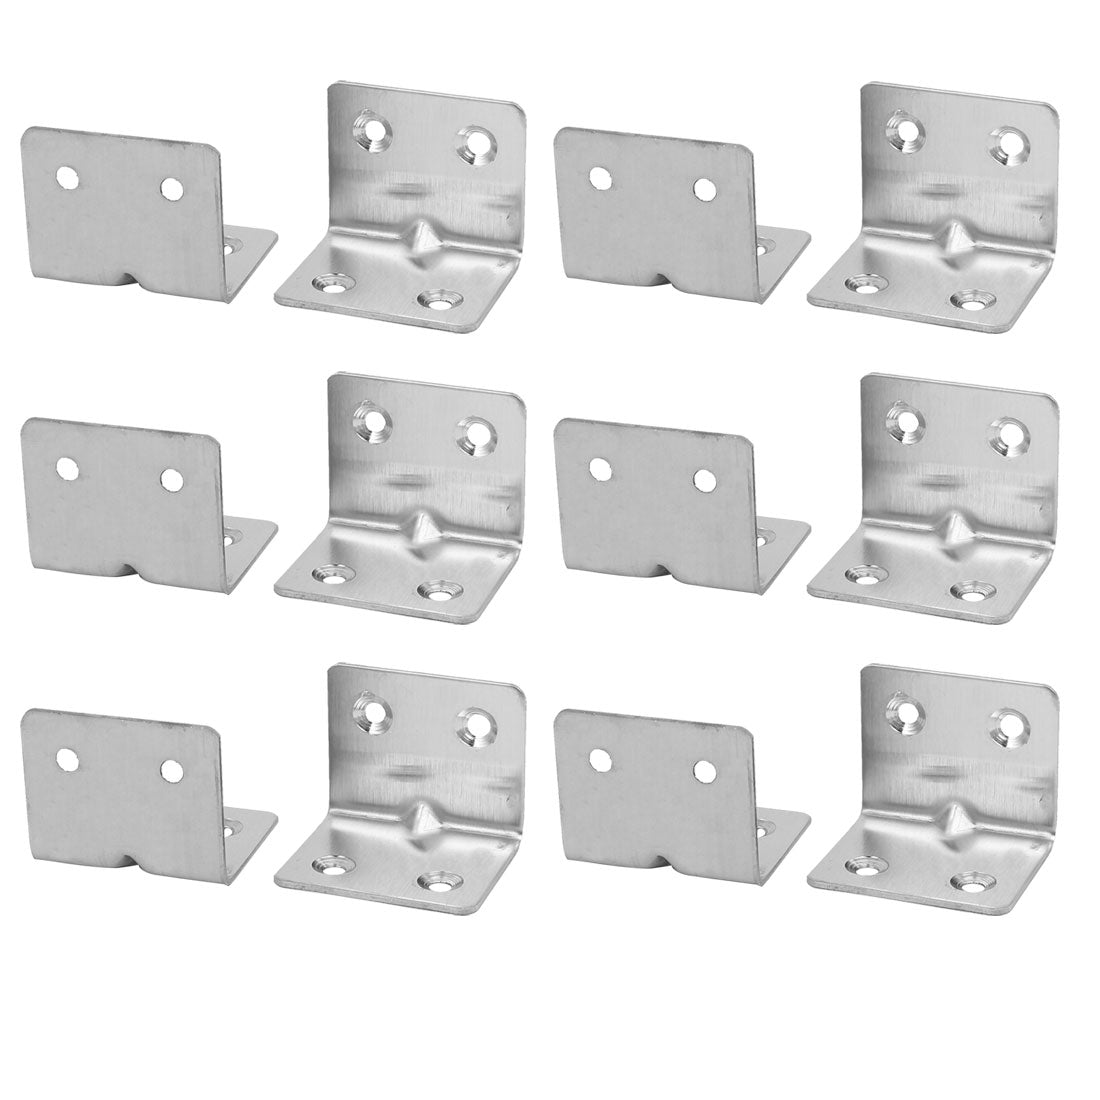 uxcell Uxcell 30mmx30mmx38mm Stainless Steel 4 Holes Corner Brace Joint Angle Brackets 12pcs